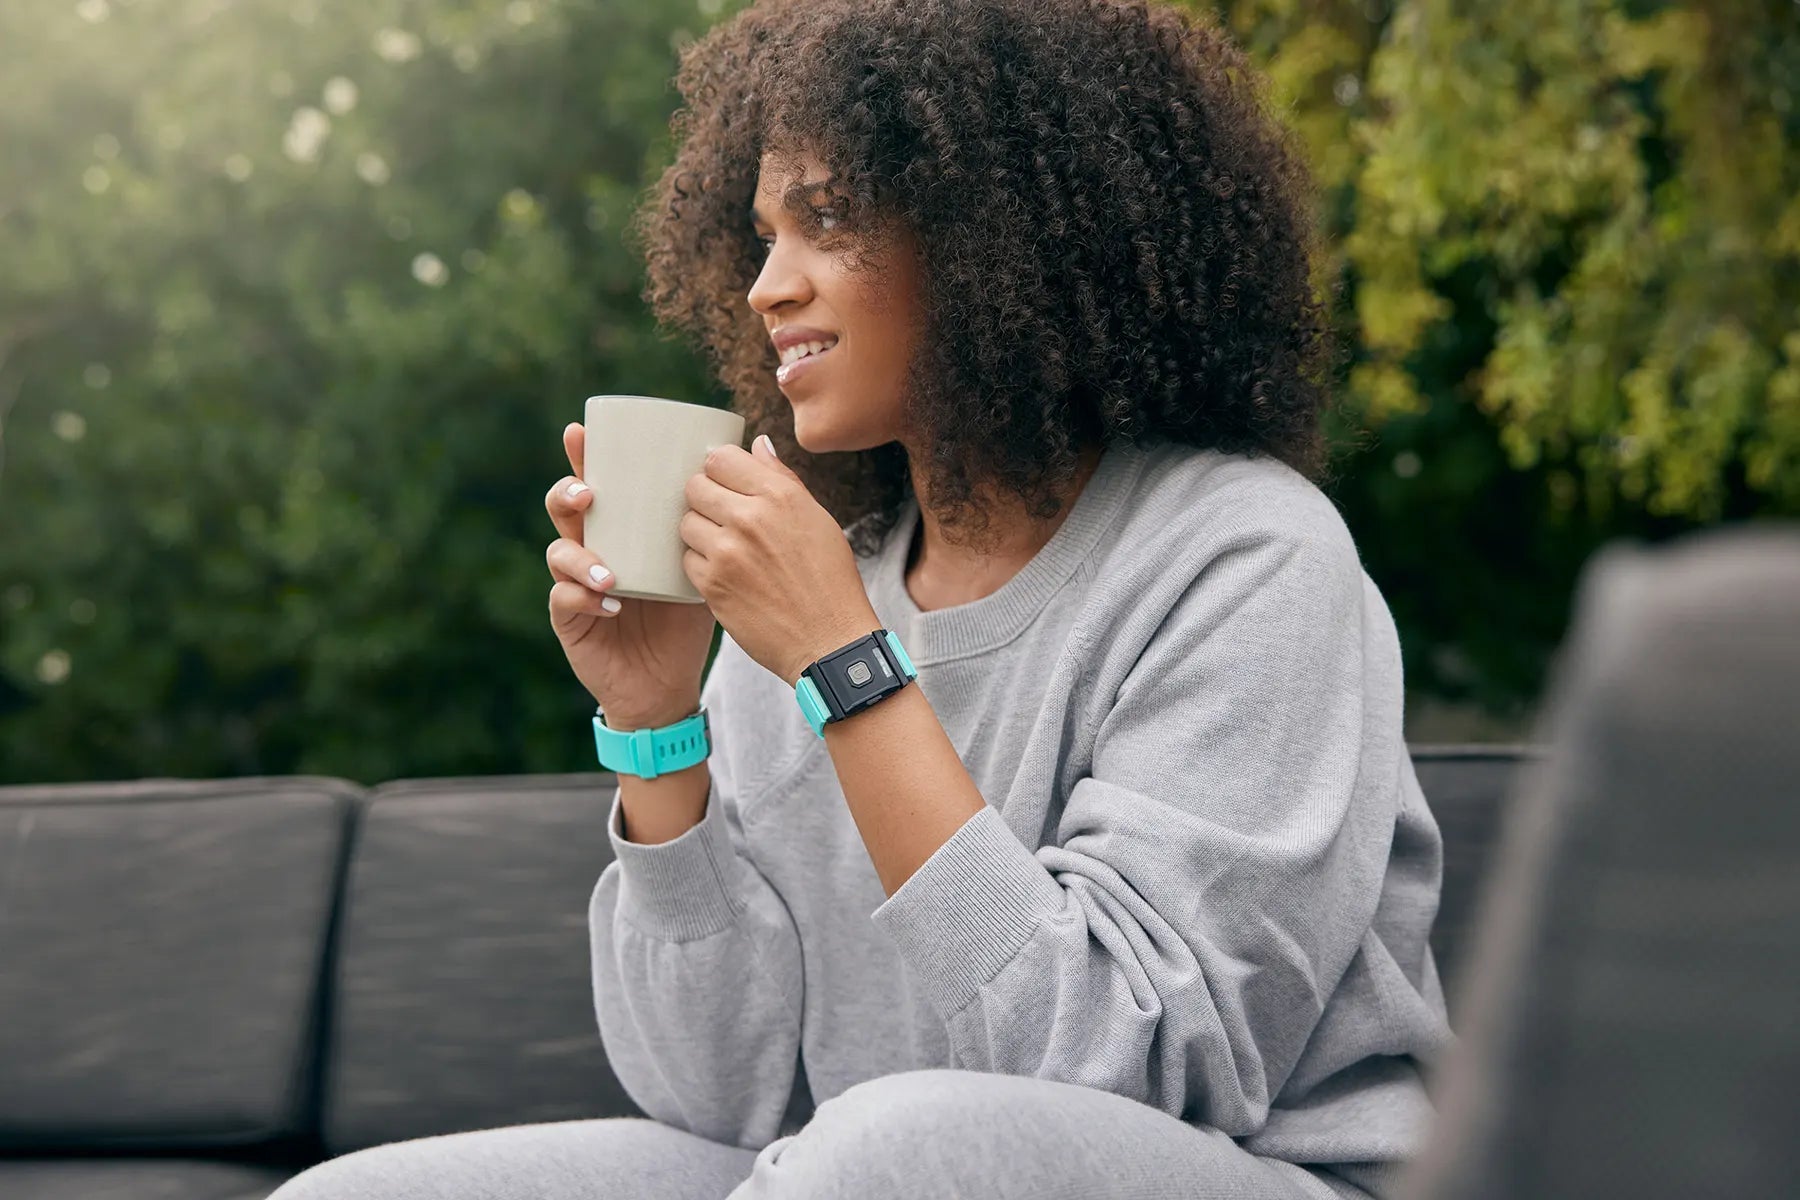 A person with medium skin tone and shoulder length black hair is sitting outside on a couch. They are holding a beverage in a cup and wearing TouchPoints with Wristbands.